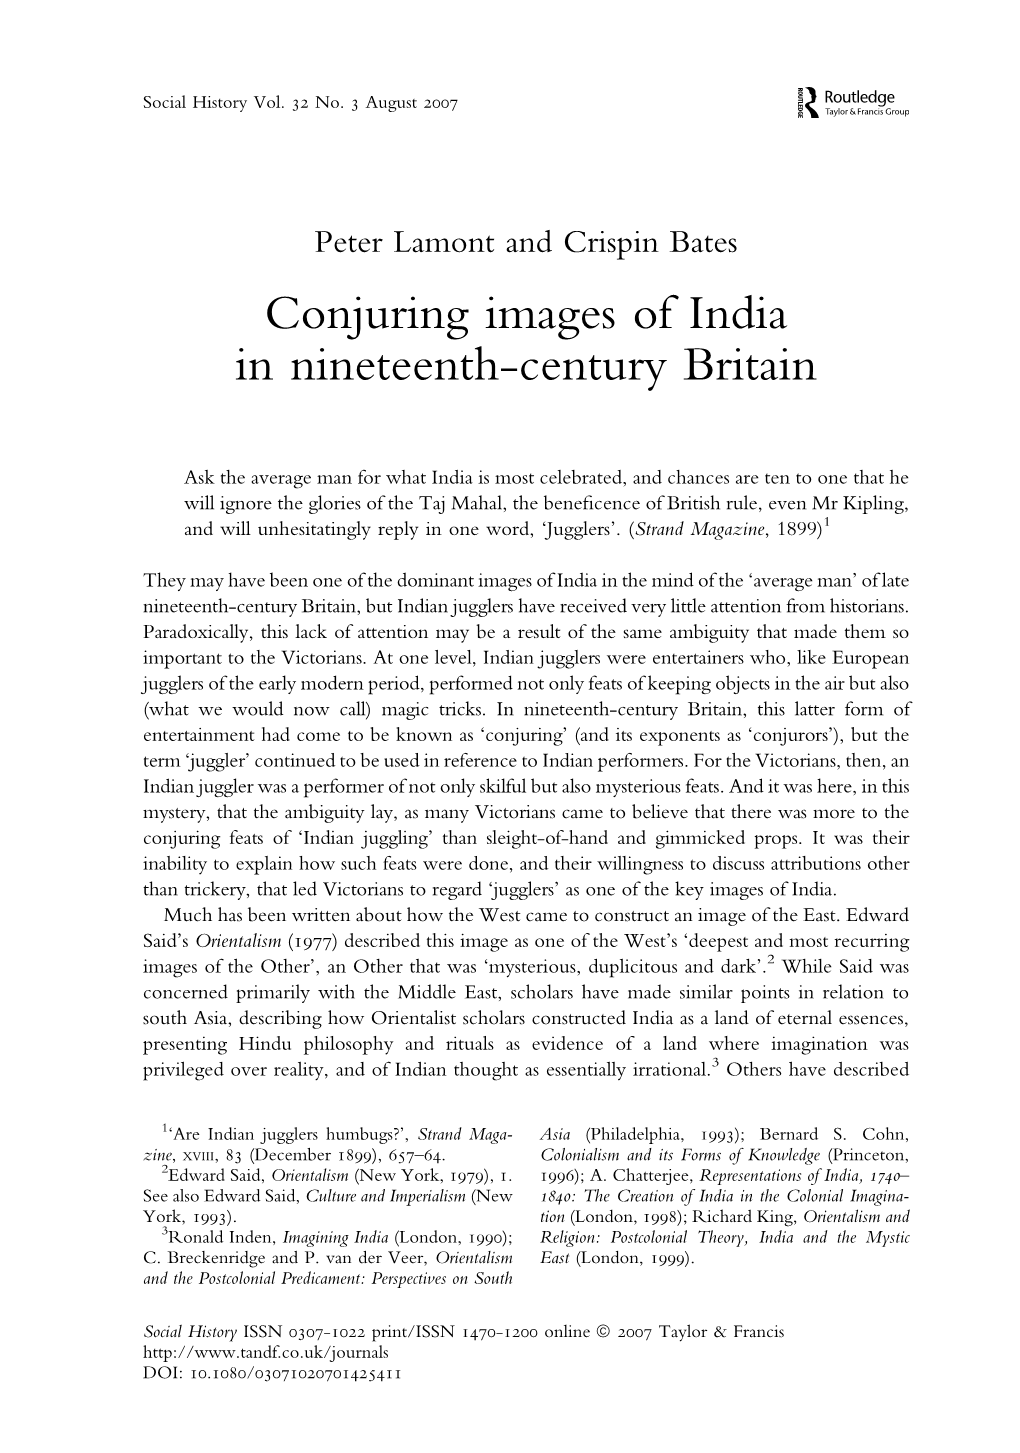 Conjuring Images of India in Nineteenth-Century Britain